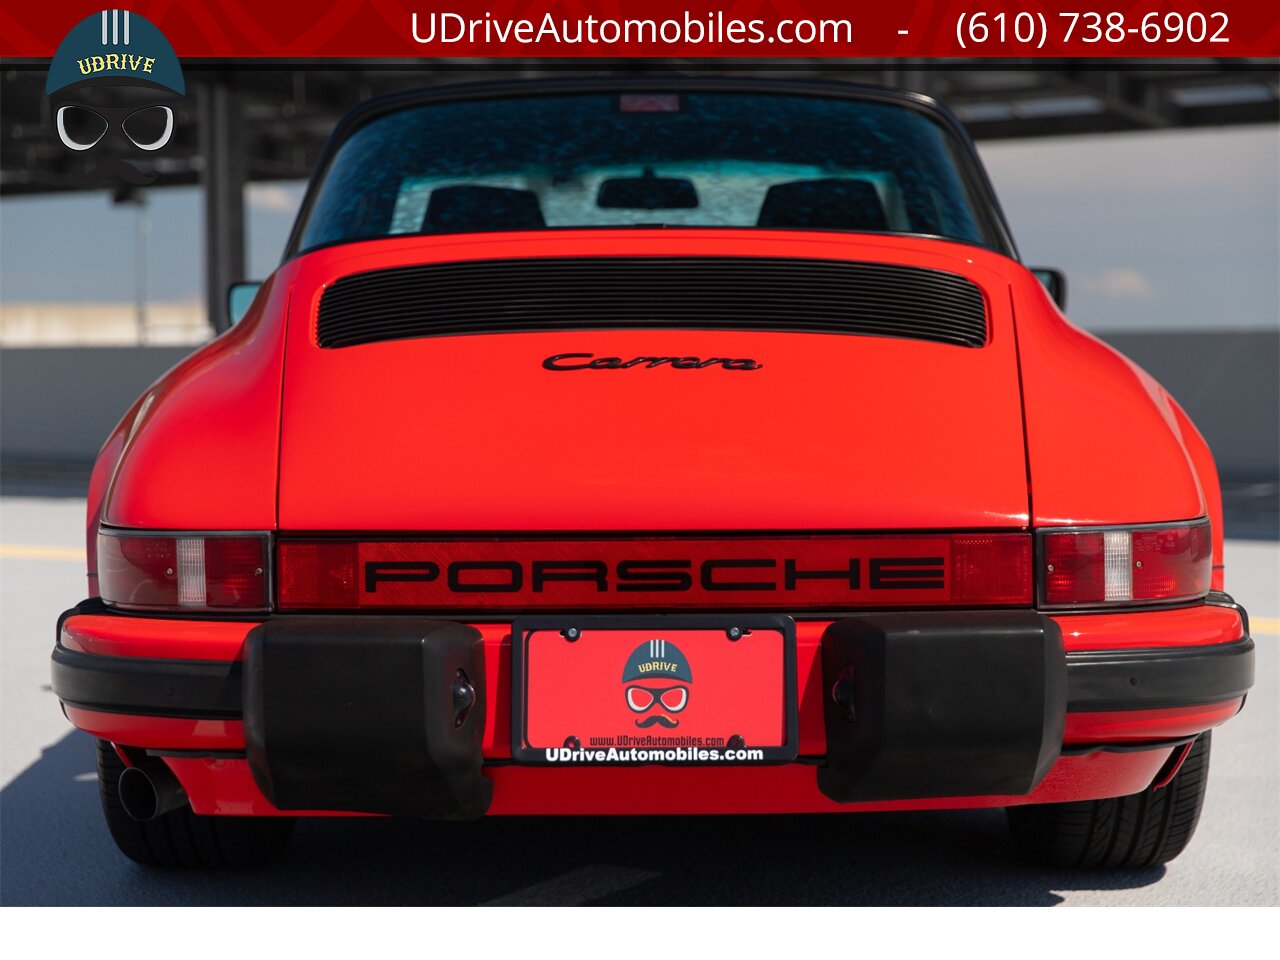 1986 Porsche 911 Carrera Targa 39k Miles Same Owner Since 1988  $23k in Service History Since 2011 - Photo 22 - West Chester, PA 19382